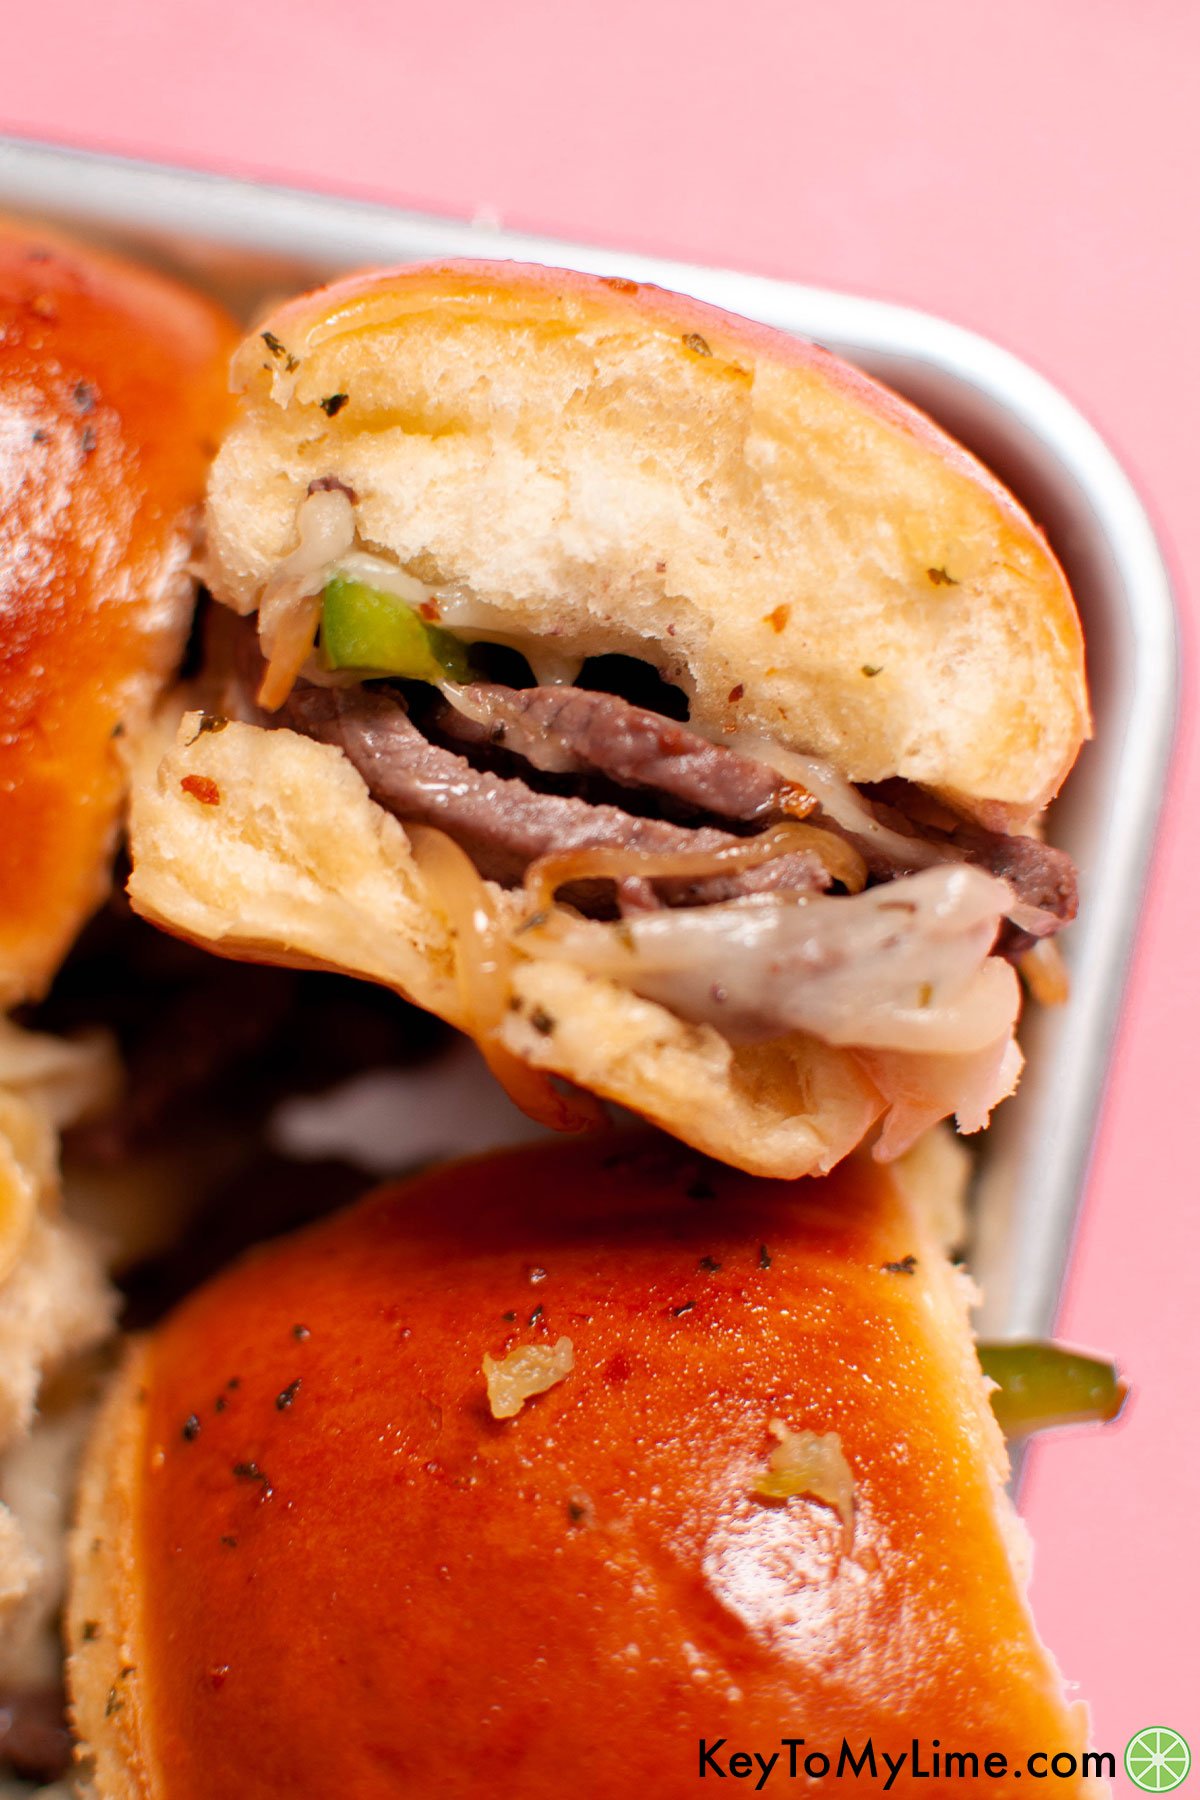 A close up of a Philly cheesesteak slider against a pink background.